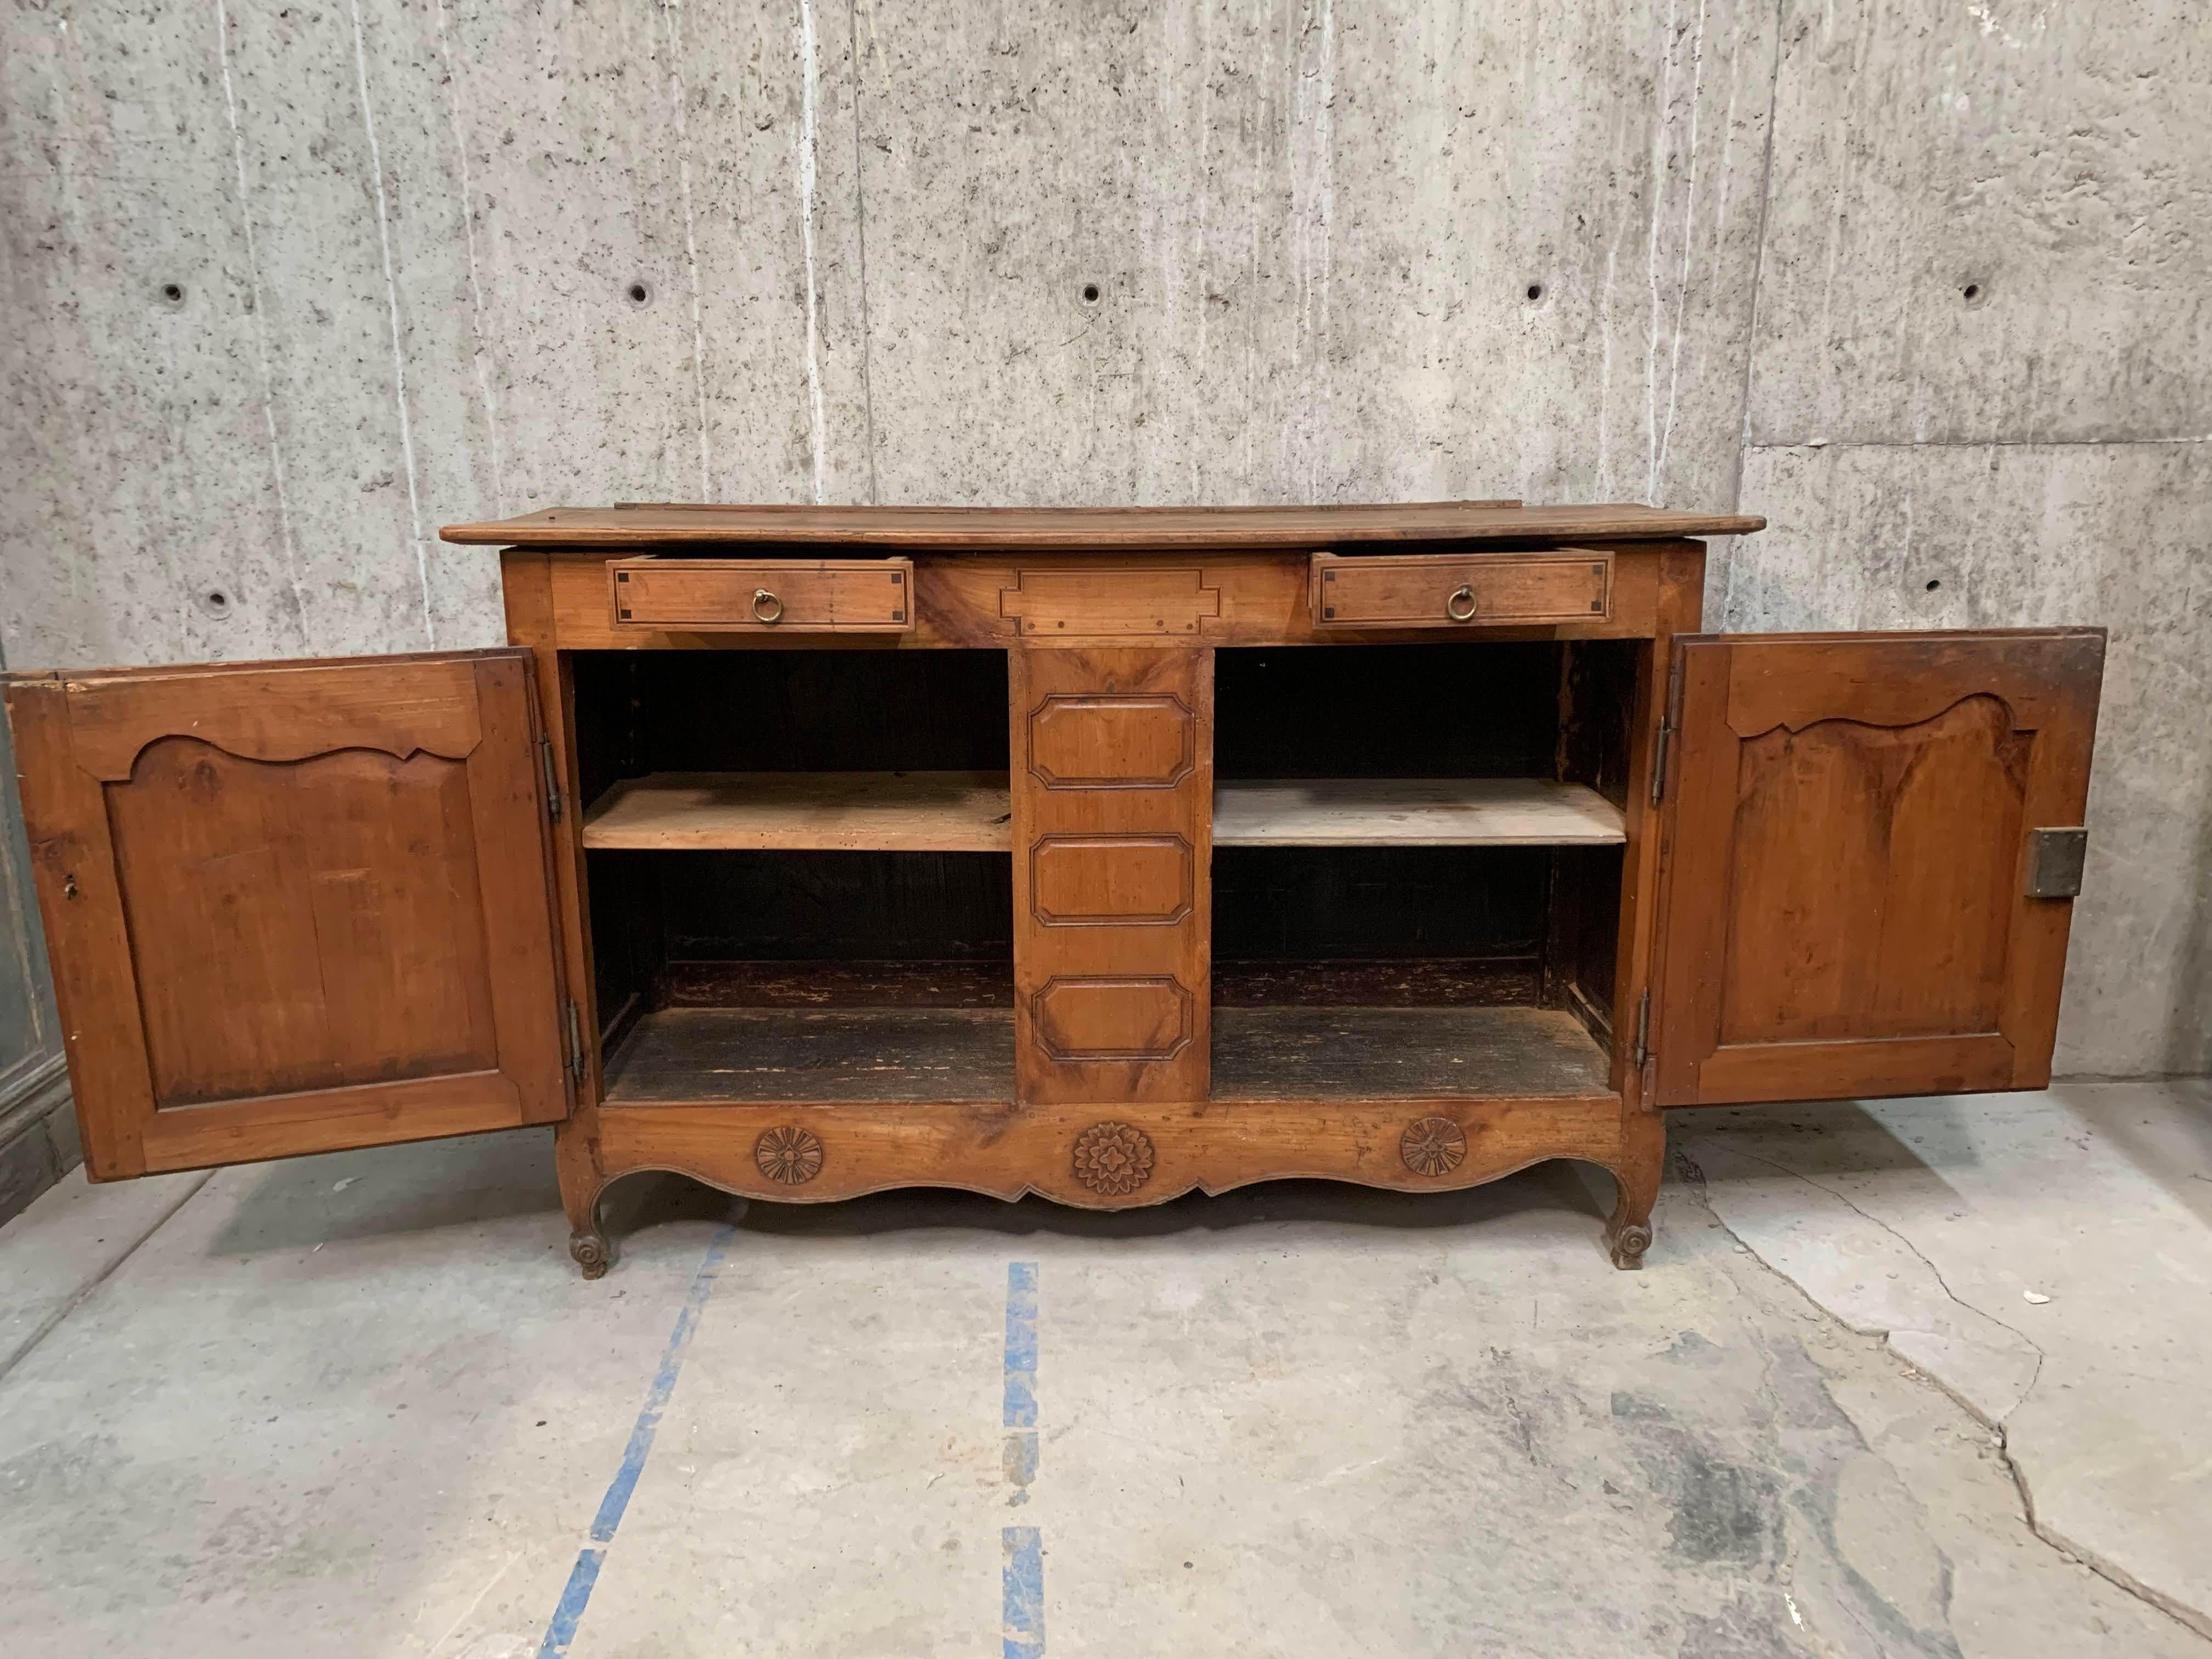 19th Century Antique French Tall Cherrywood Shallow Depth Buffet With Dish Display For Sale